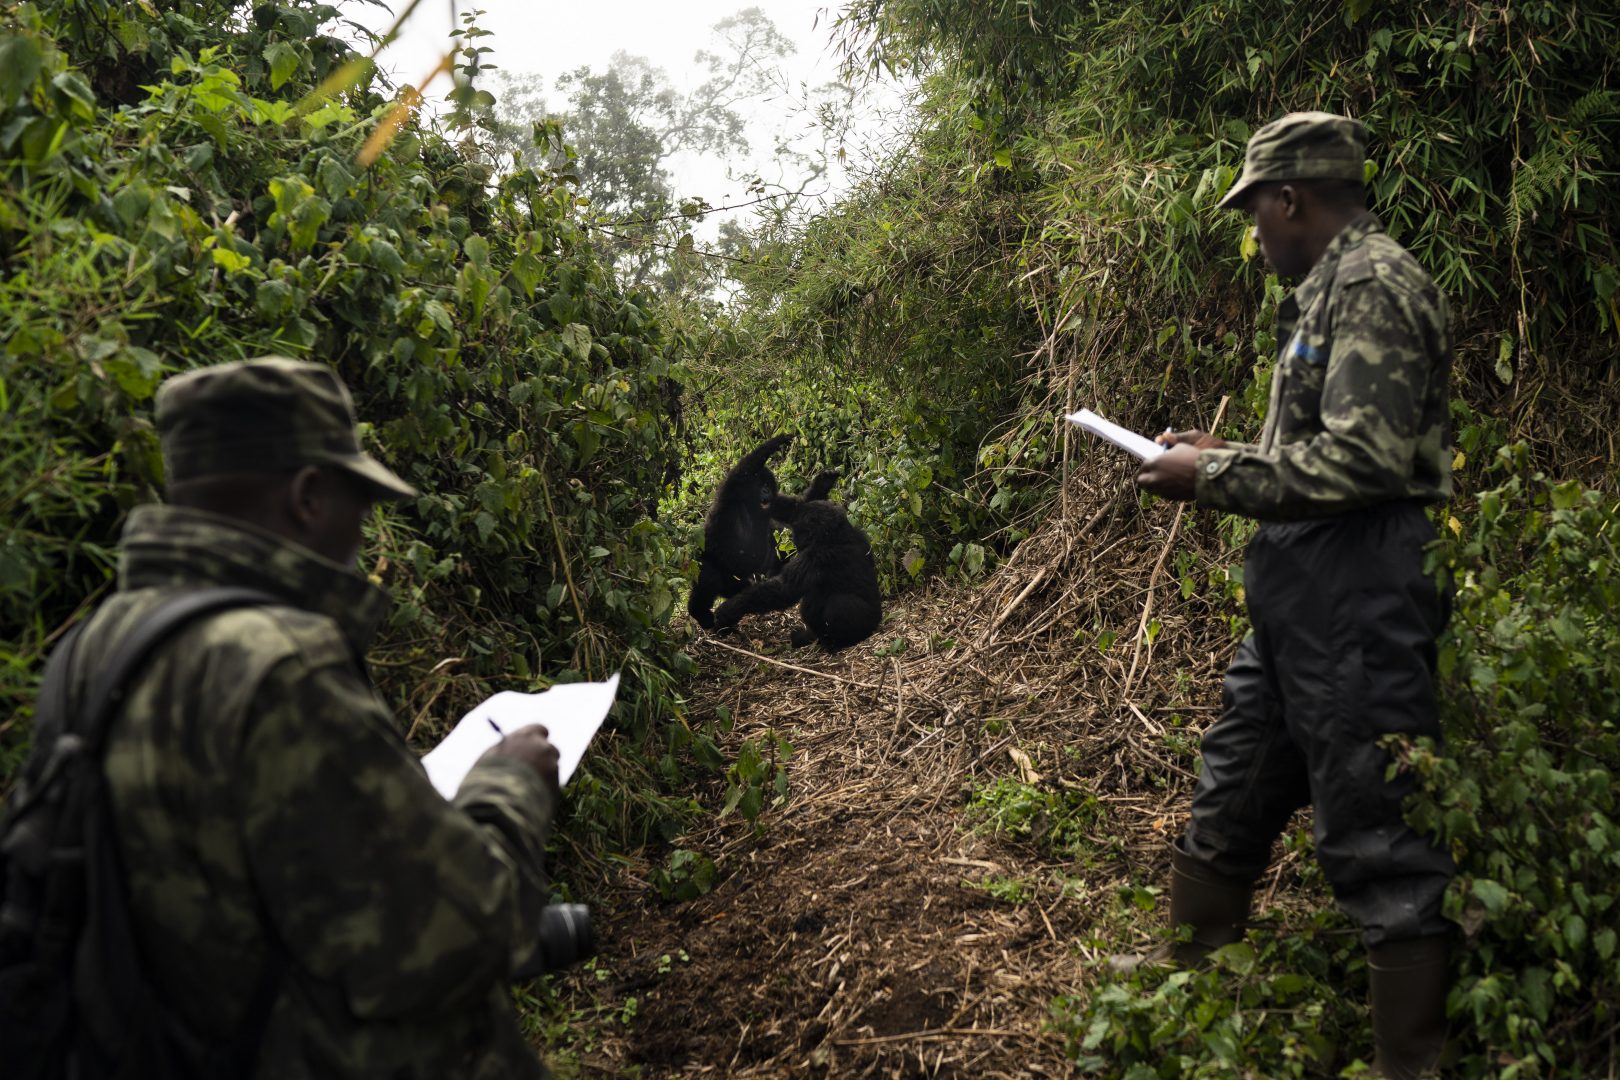 In this Sept. 4, 2019 photo, gorilla trackers Emmanuel Bizagwira, right, and Safari Gabriel observe two gorillas from the Agasha group as they play in the Volcanoes National Park, Rwanda. George Schaller, a renowned biologist and gorilla expert, conducted the first detailed studies of mountain gorillas in the 1950s and early ‘60s, in what was then the Belgian Congo. He also was the first to discover that wild gorillas could, over time, become comfortable with periodic human presence, a boon to researchers and, later, tourists.